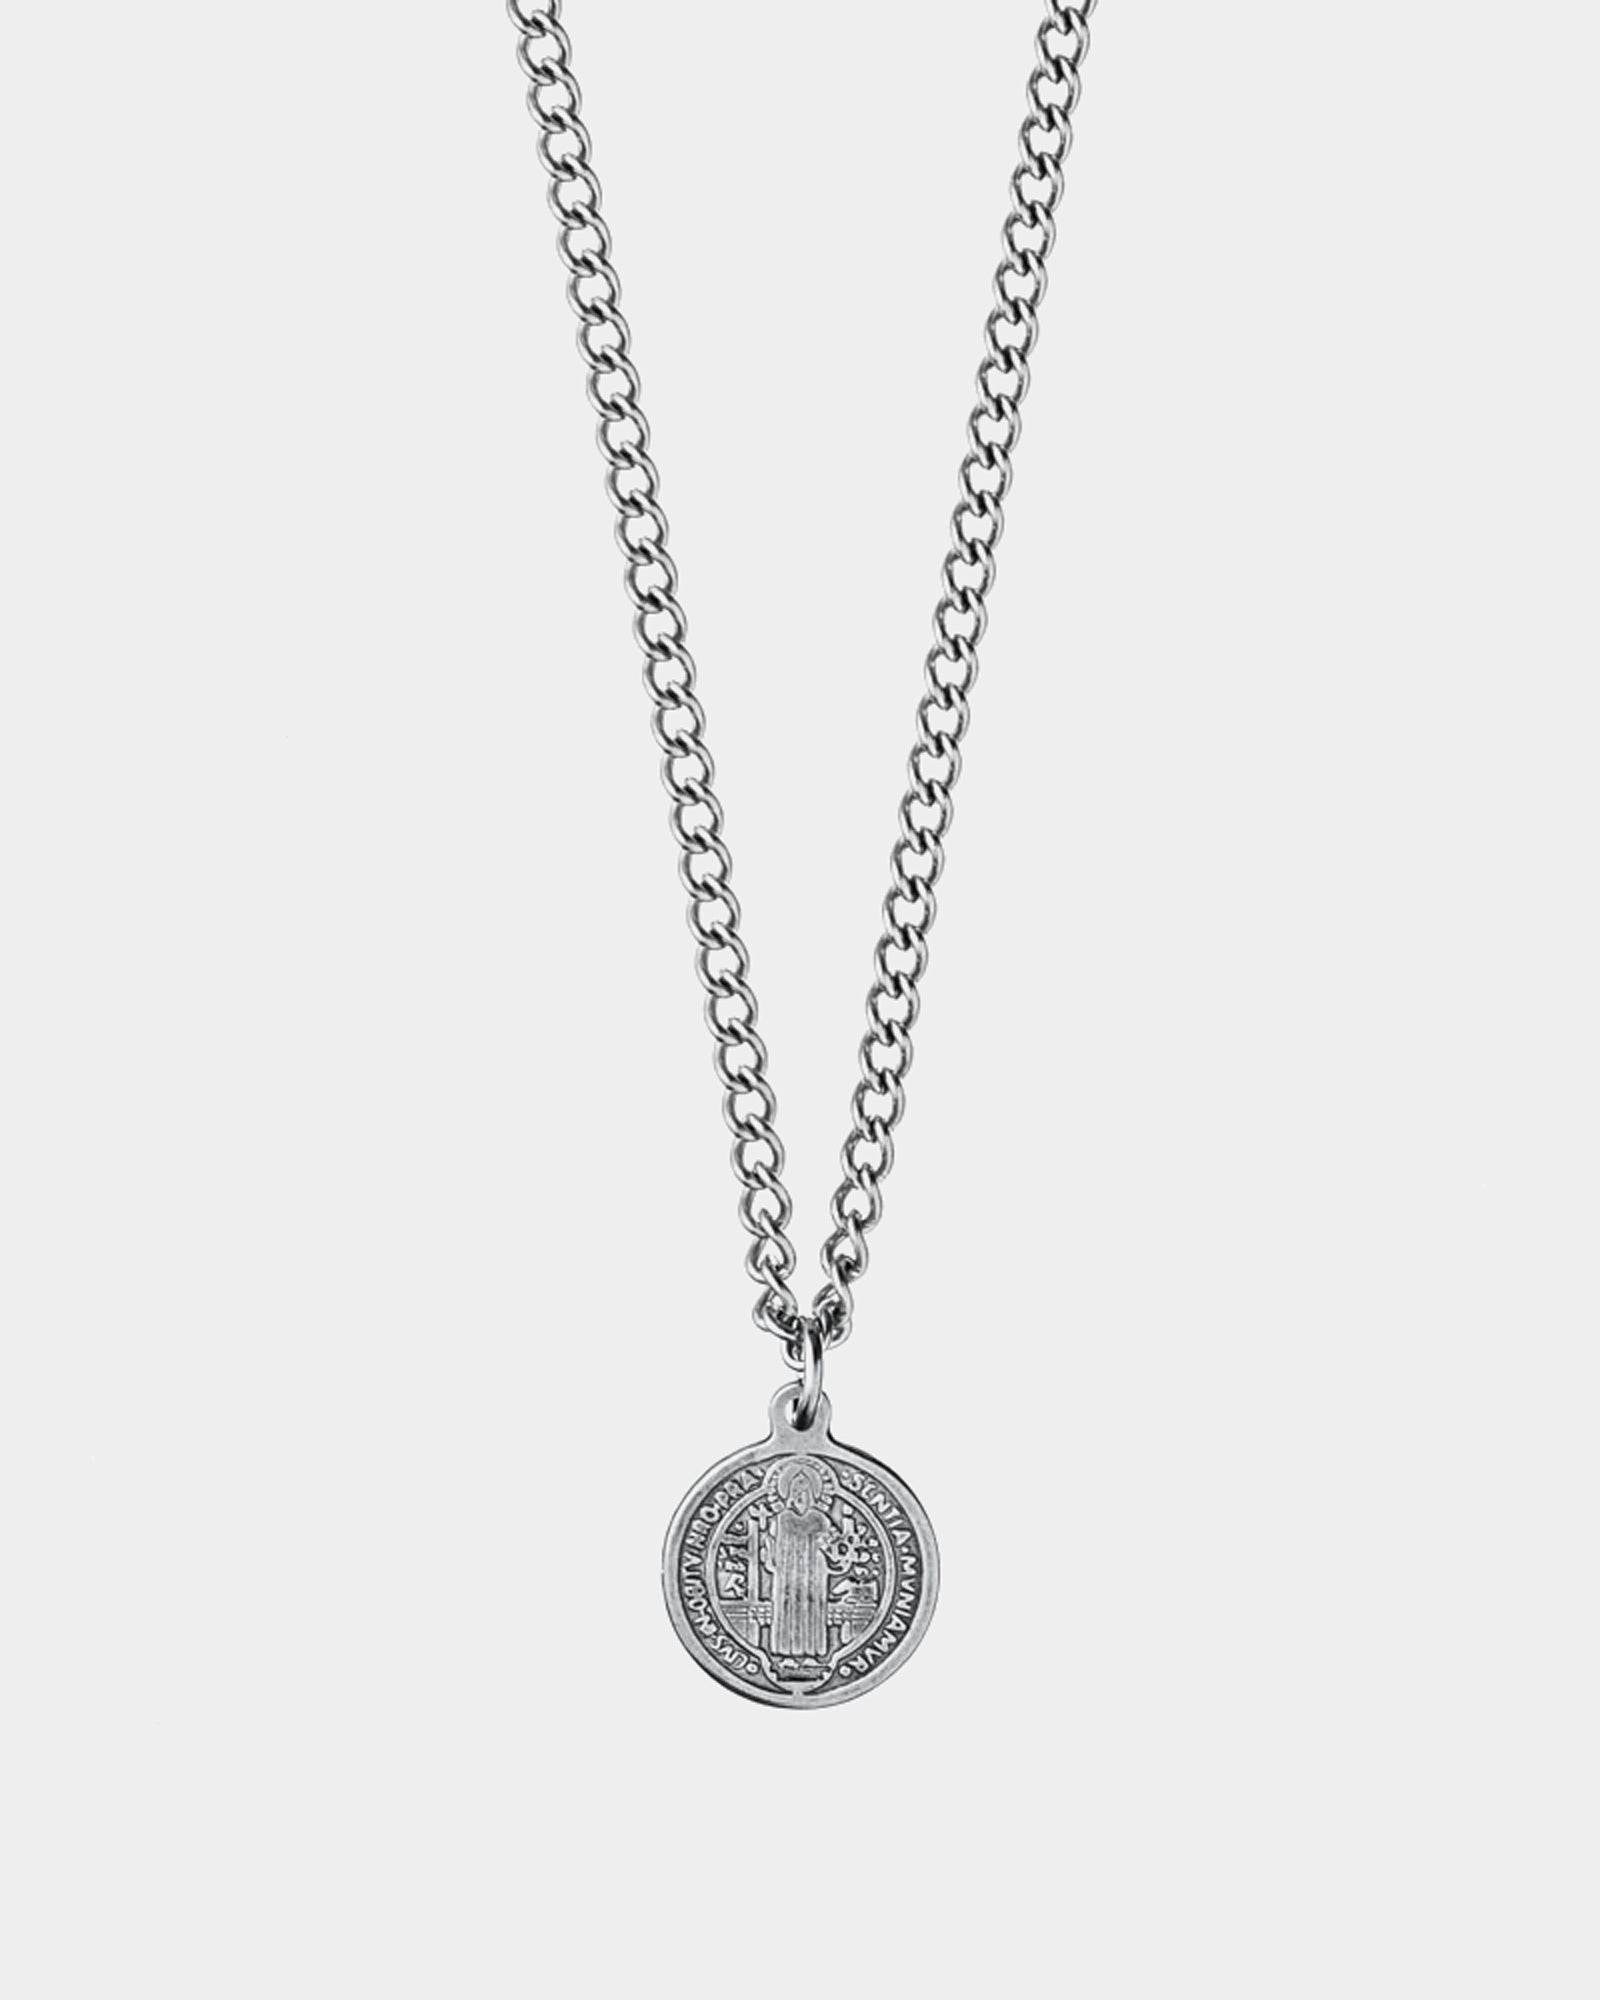 St. Benedict's Necklace - Stainless Steel Necklace with double engraved 'St. Benedict's' Pendant - Online Unissex Jewelry - Dicci